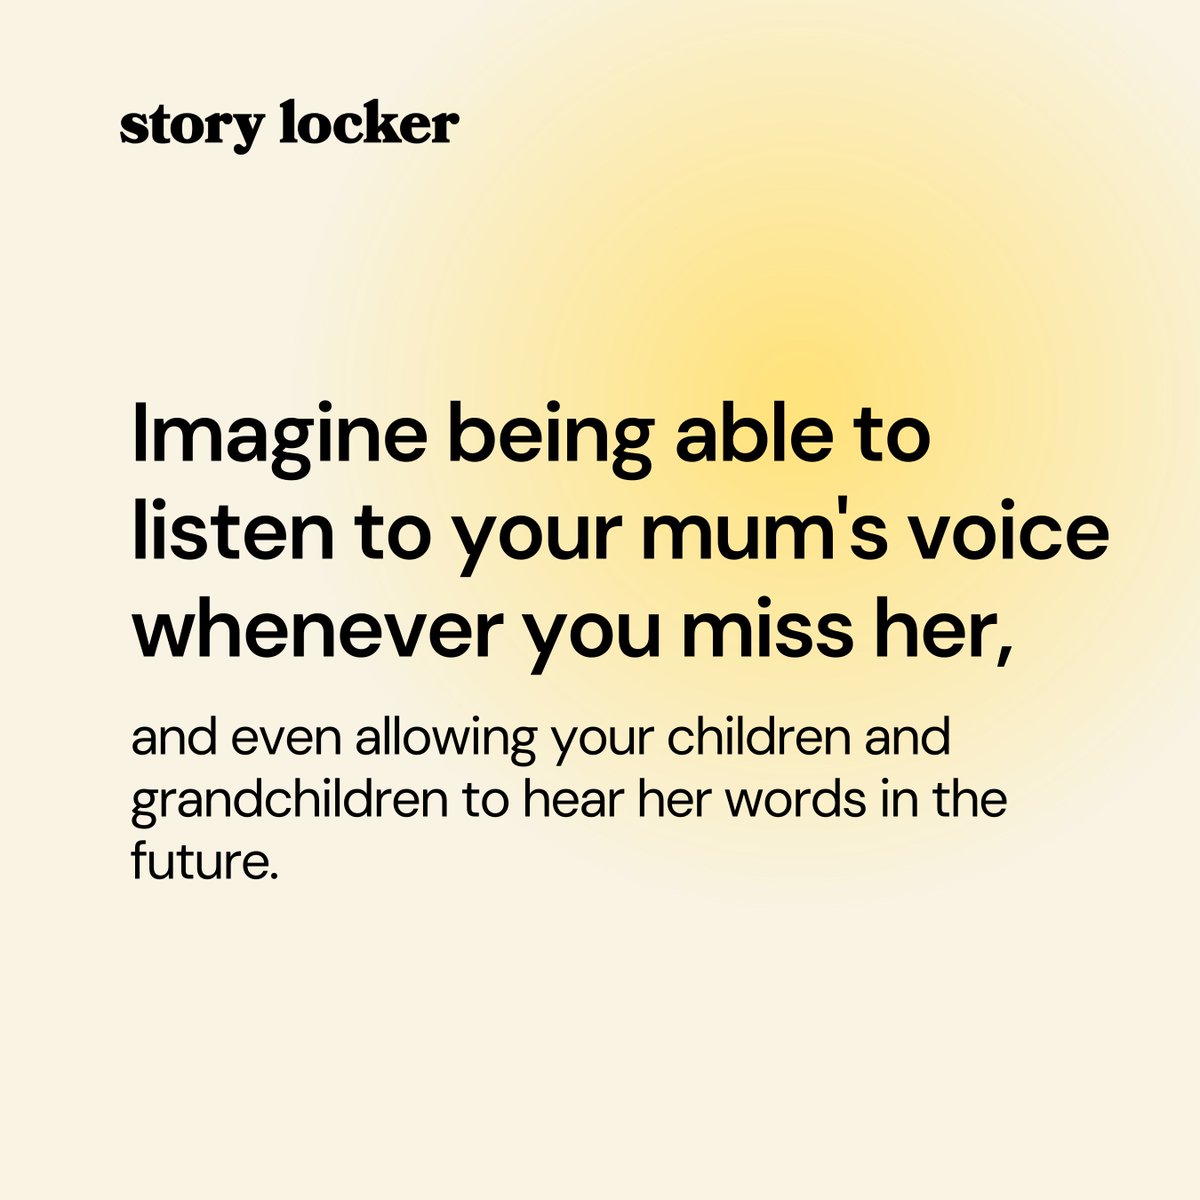 Imagine being able to listen to your mum's voice whenever you miss her, and even allowing your children and grandchildren to hear her words in the future. 💛♾️

Buy now on storylocker.co.uk 🎙️

#StoryLocker #PersonalPodcast #lifestory #mum #ukmum #children #british